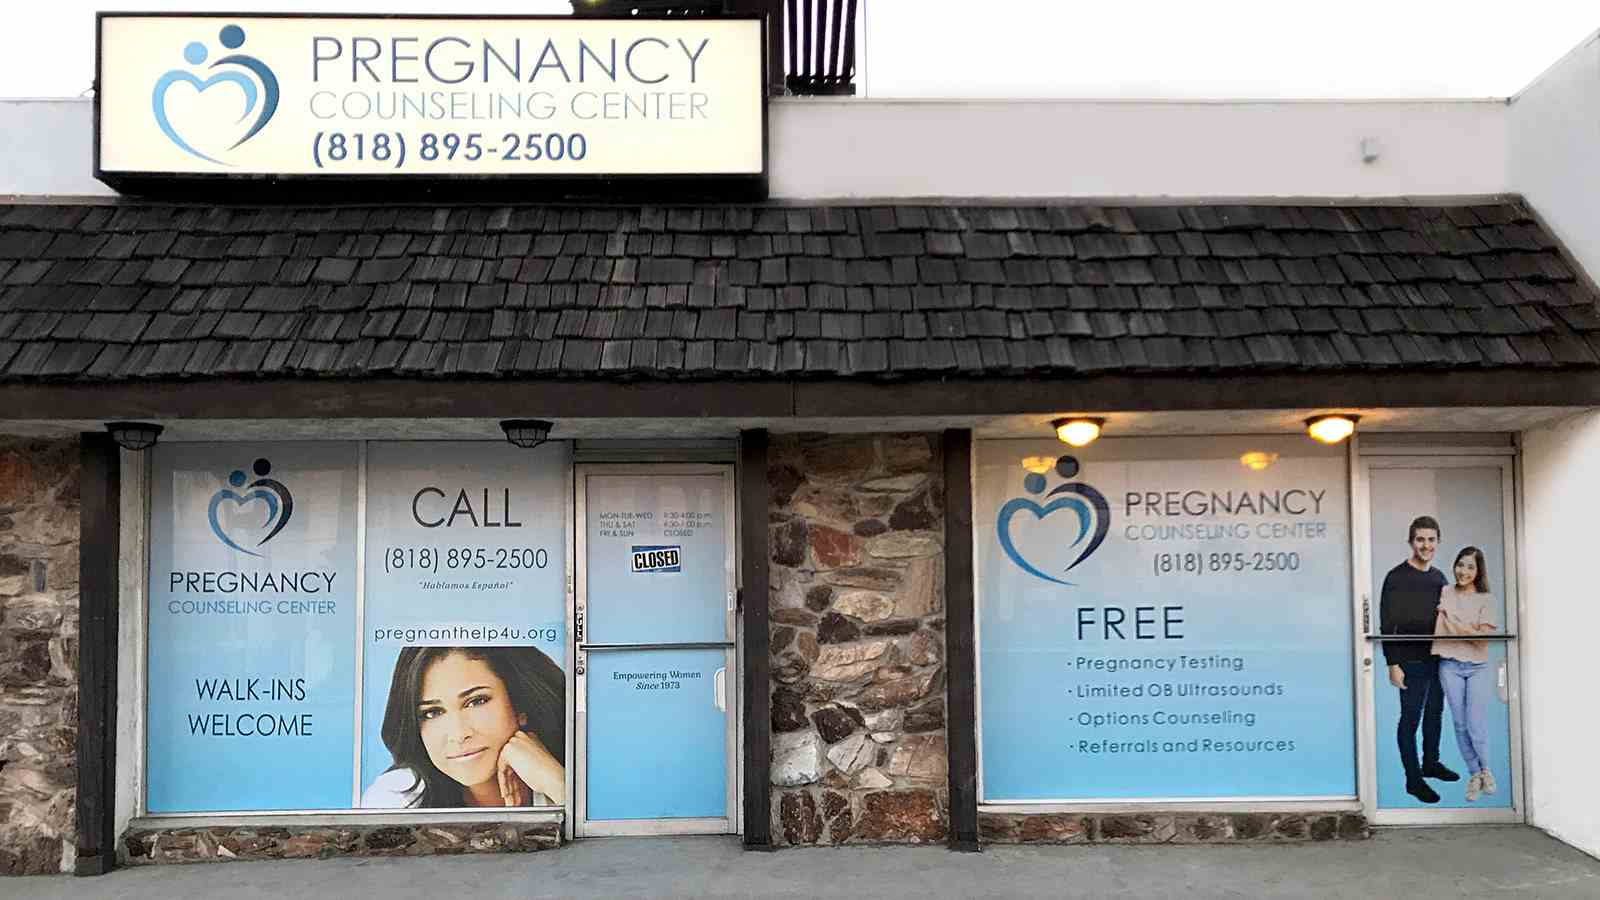 pregnancy counseling center lightbox sign